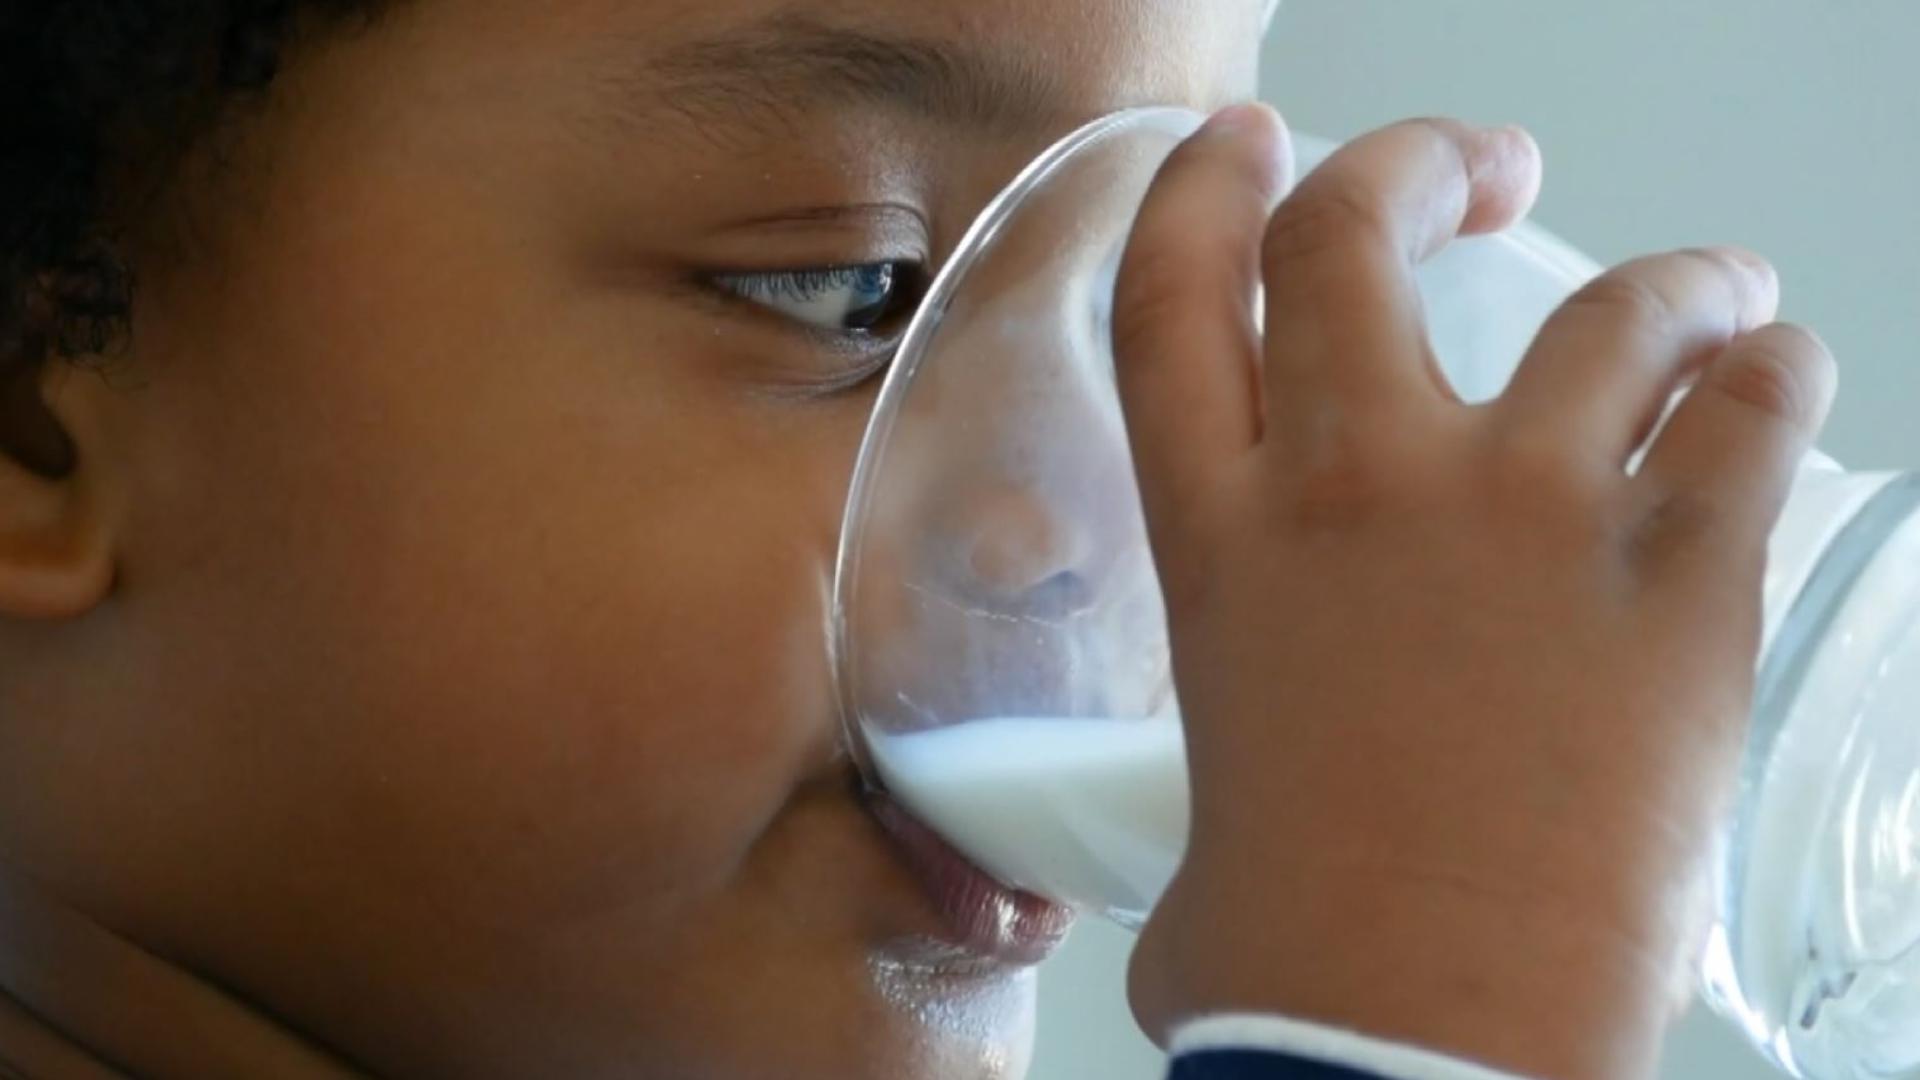 Besides essential vitamins and minerals, there might be something else in milk that's not good for you.